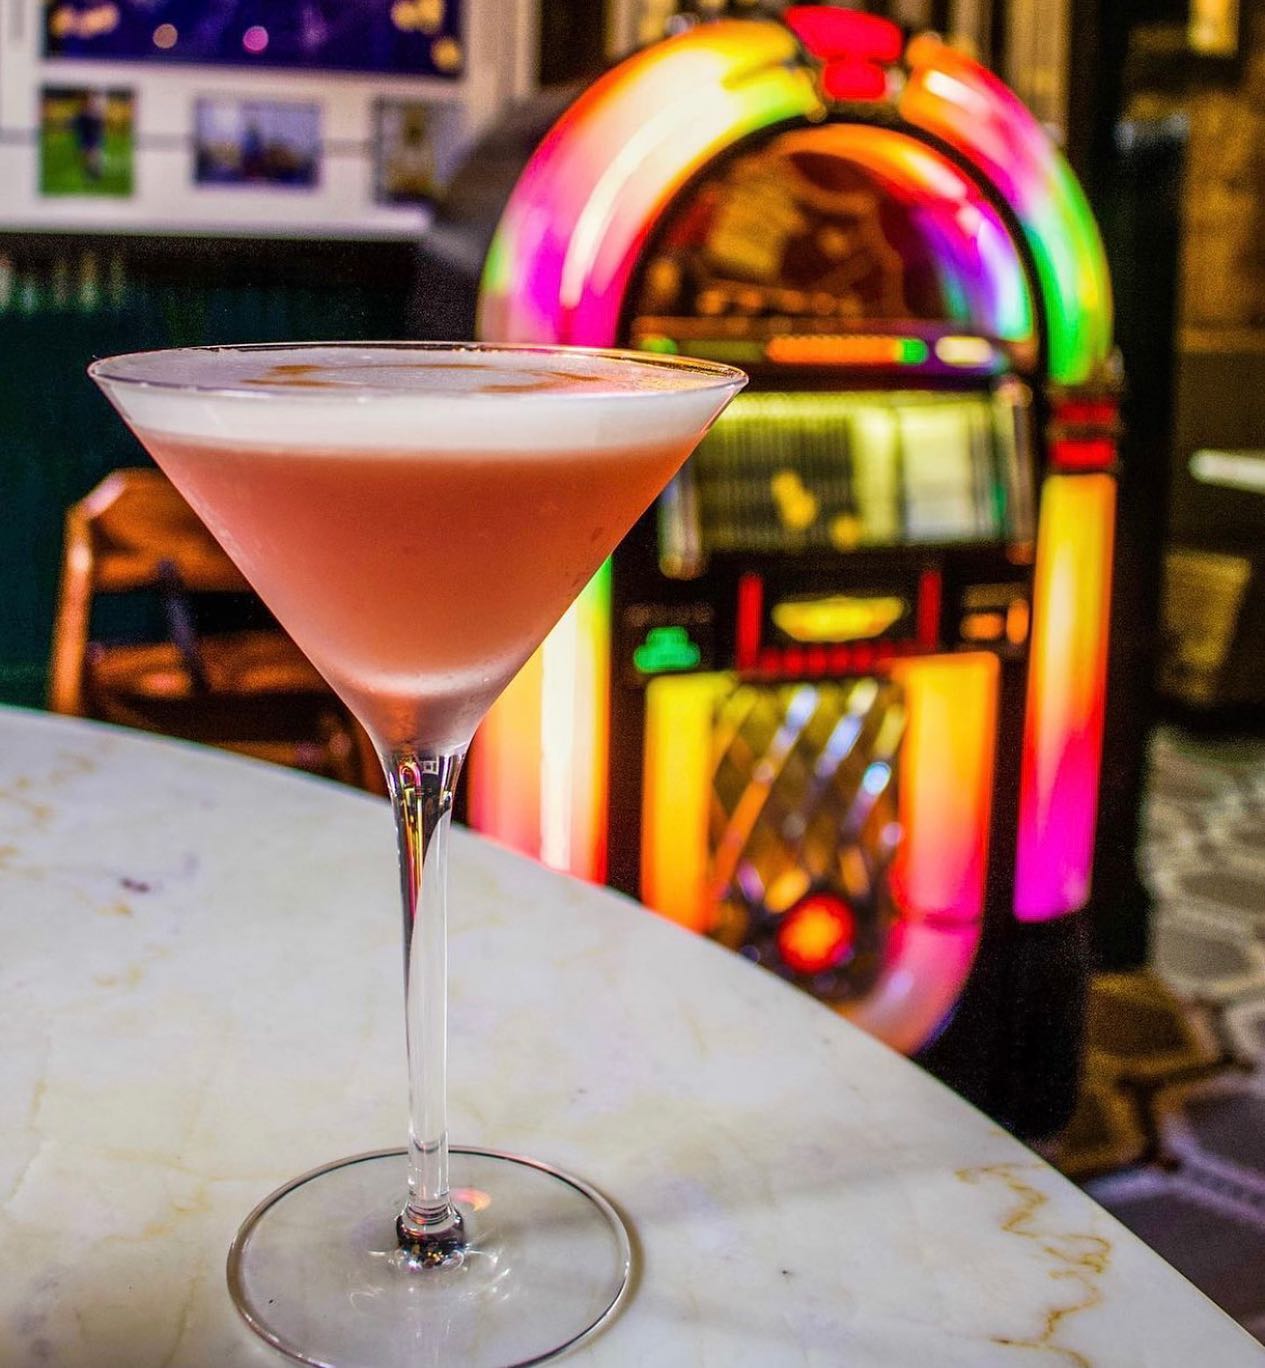 a cocktail on a table with a lit up jukebox in the background